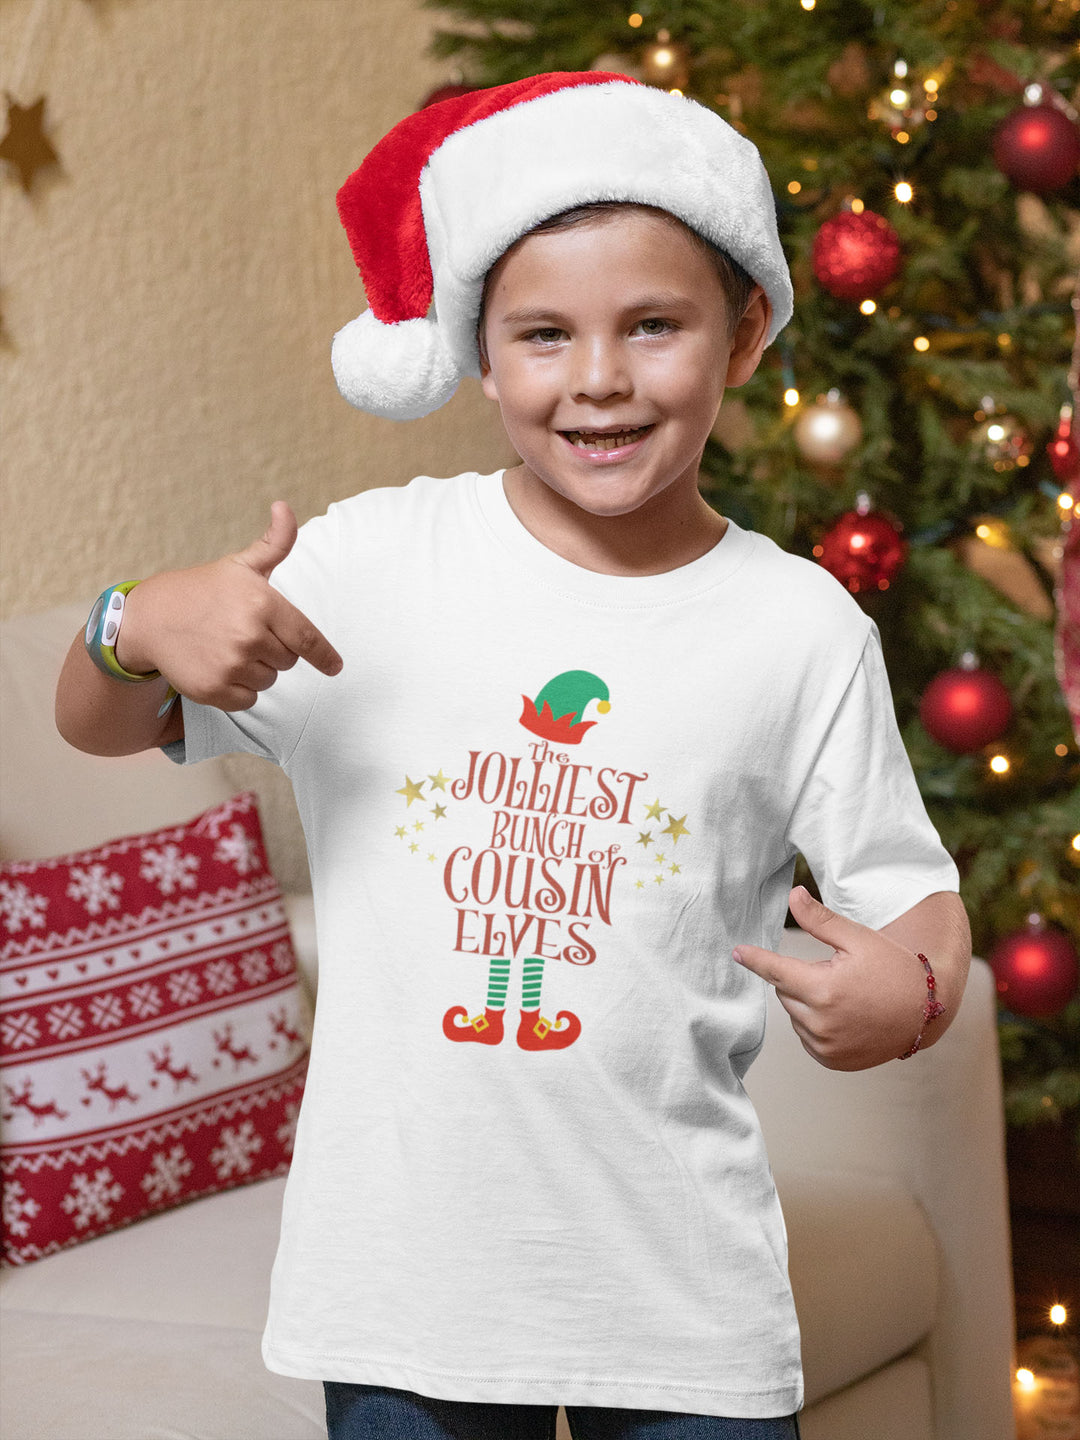 The Jolliest Bunch Cousin Elves. Short Sleeve T Shirts For Toddlers And Kids. - TeesForToddlersandKids -  t-shirt - christmas, holidays - the-jolliest-bunch-cousin-elves-short-sleeve-t-shirts-for-toddlers-and-kids